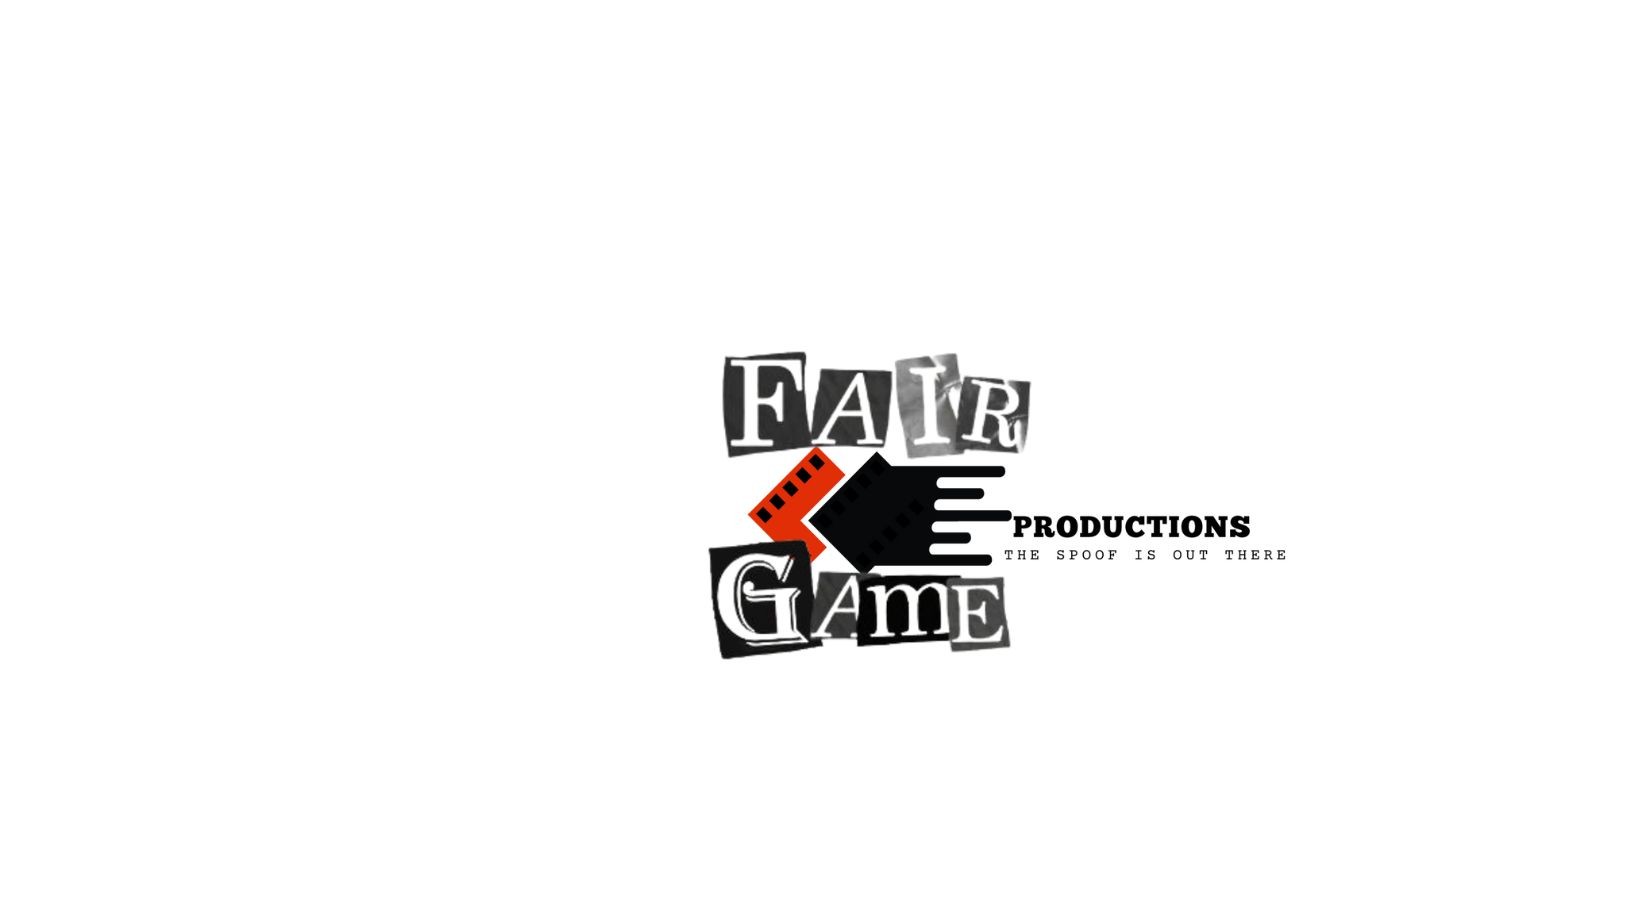 Fair Game Productions